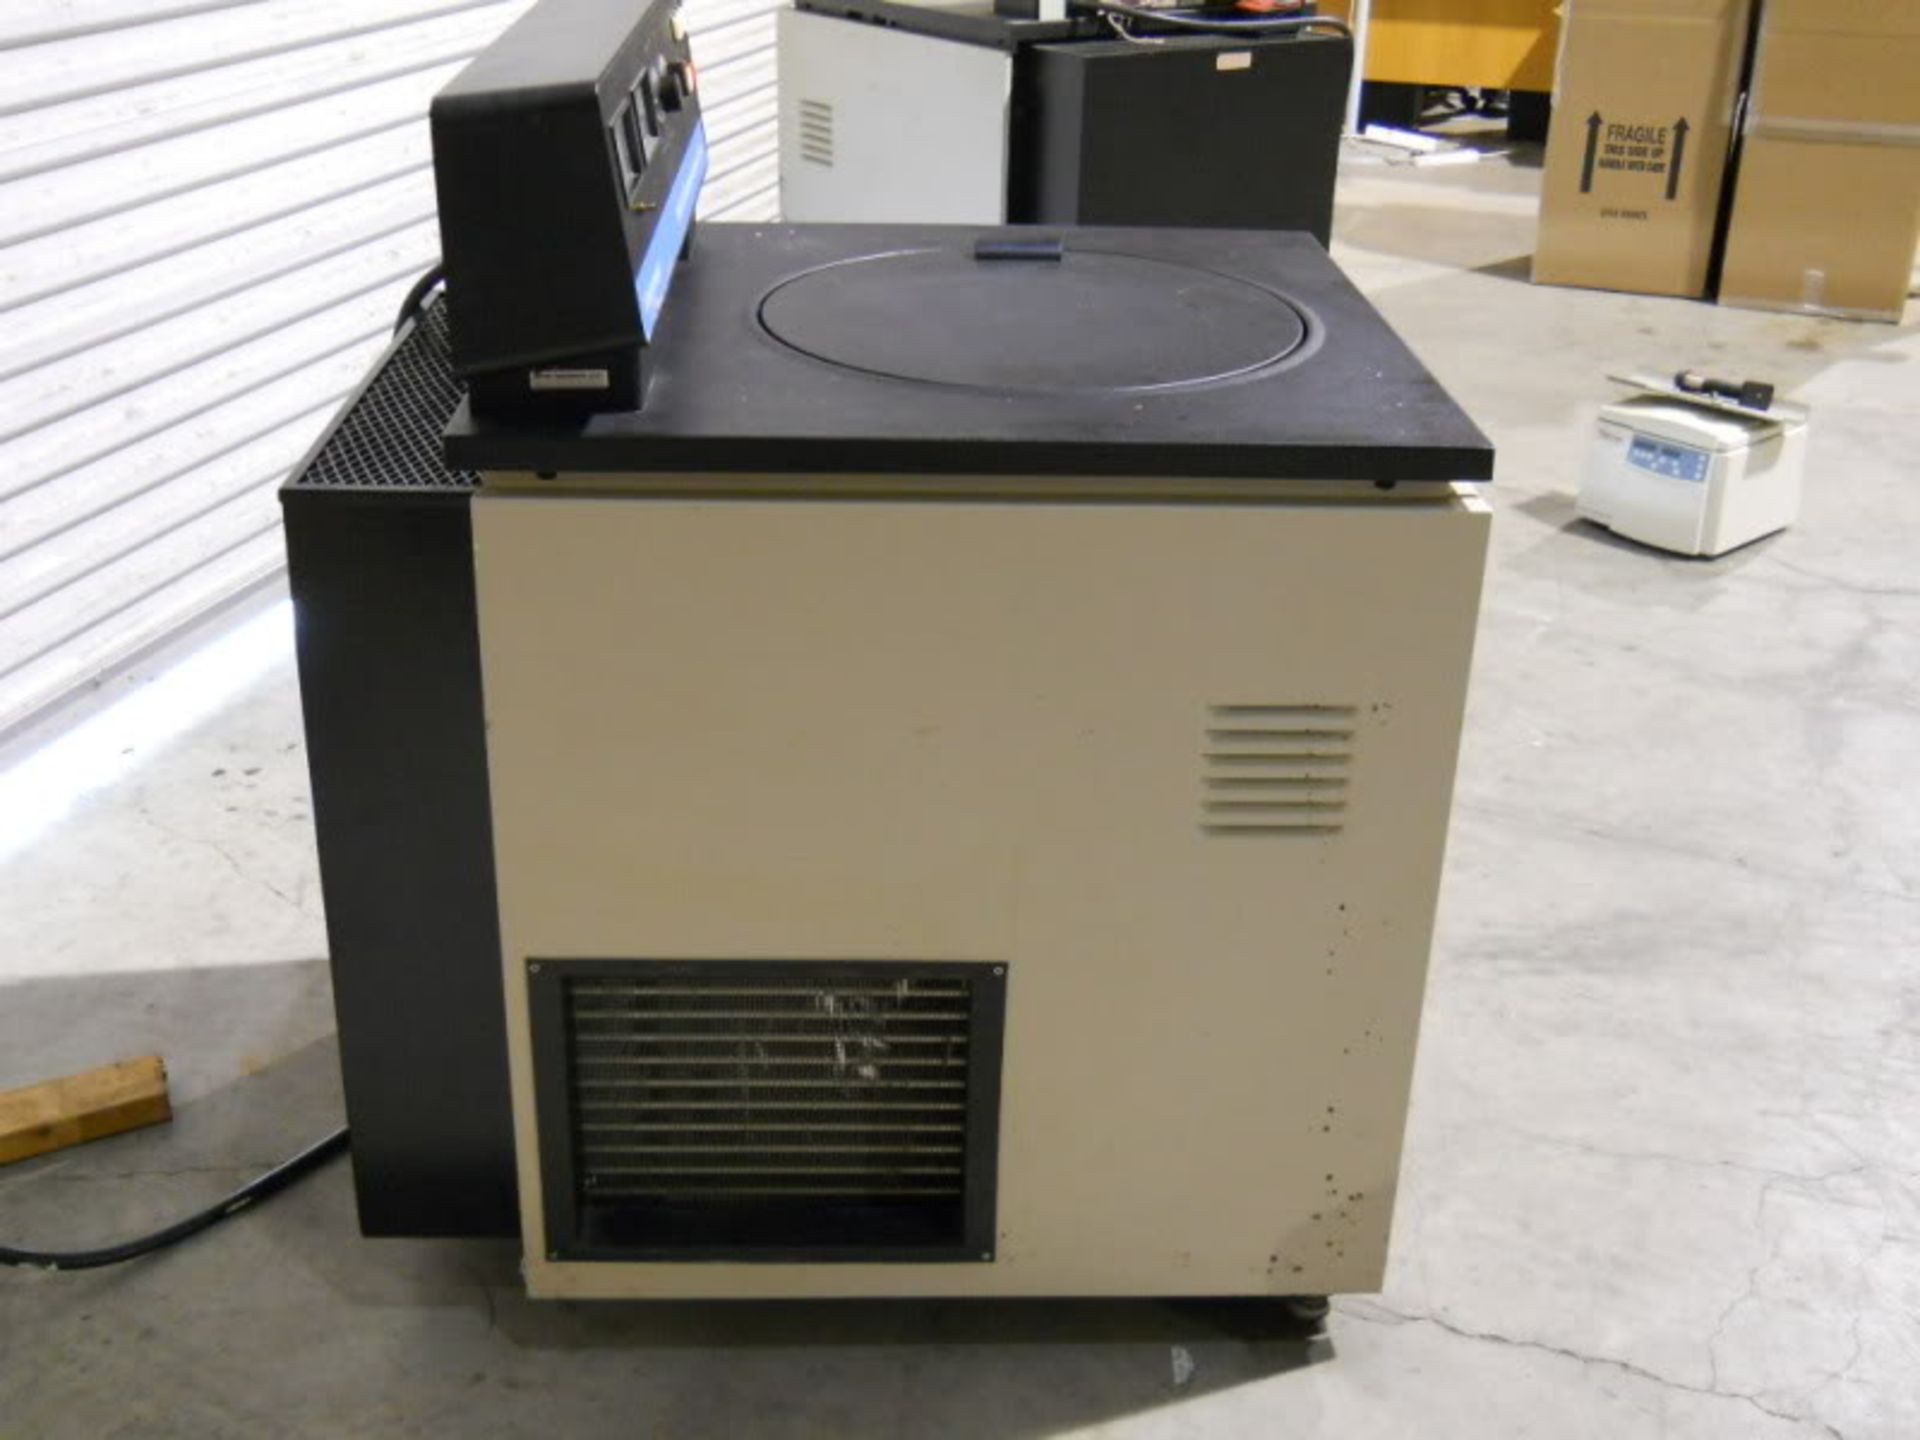 Dupont Instruments Sorvall RC-5B Refrigerated Superspeed Centrifuge (Parts), Qty 1, 320972407595 - Image 6 of 9